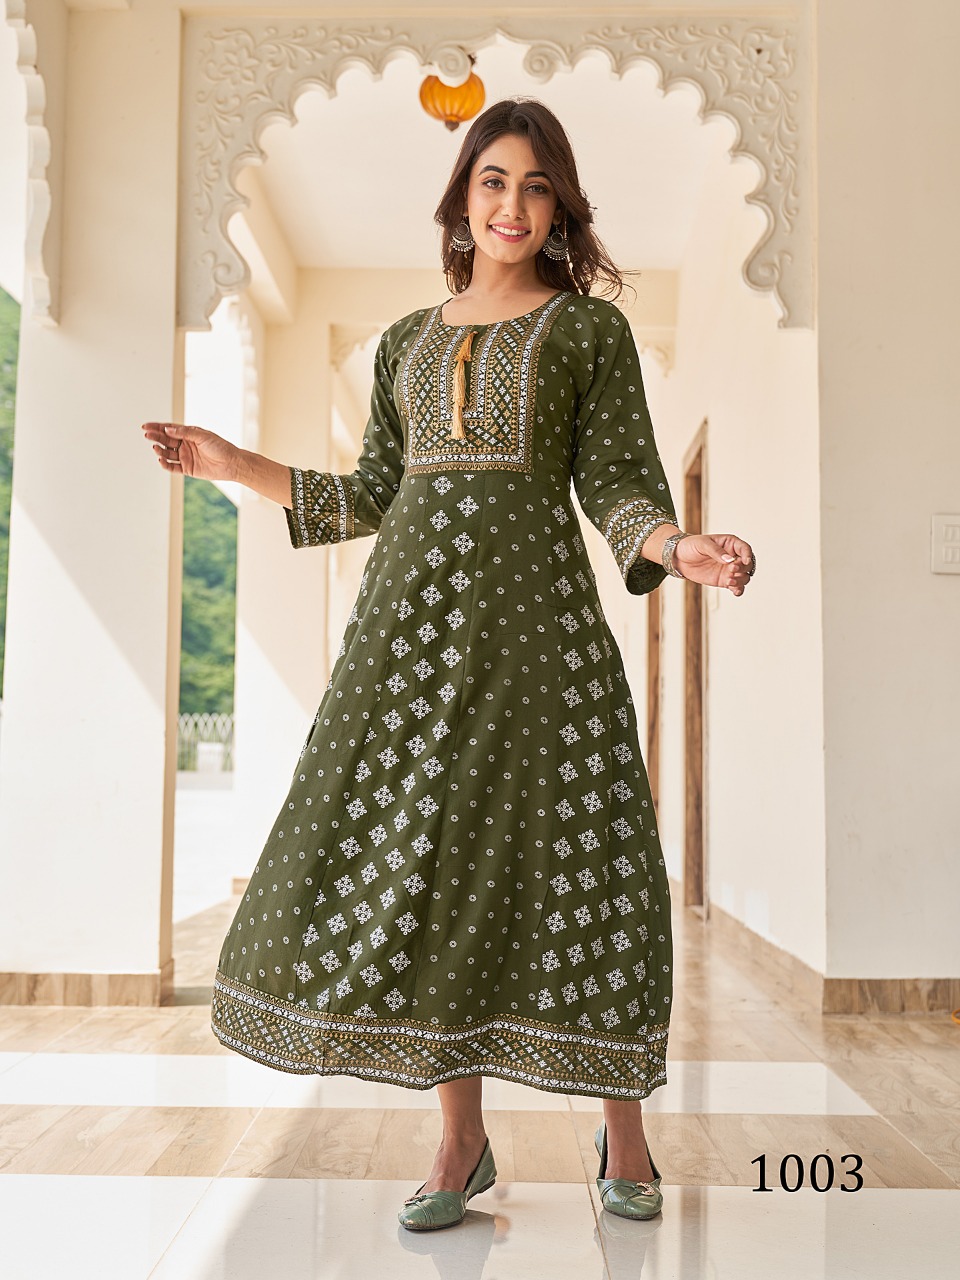 Ankle Length Kurta - Get Best Price from Manufacturers & Suppliers in India